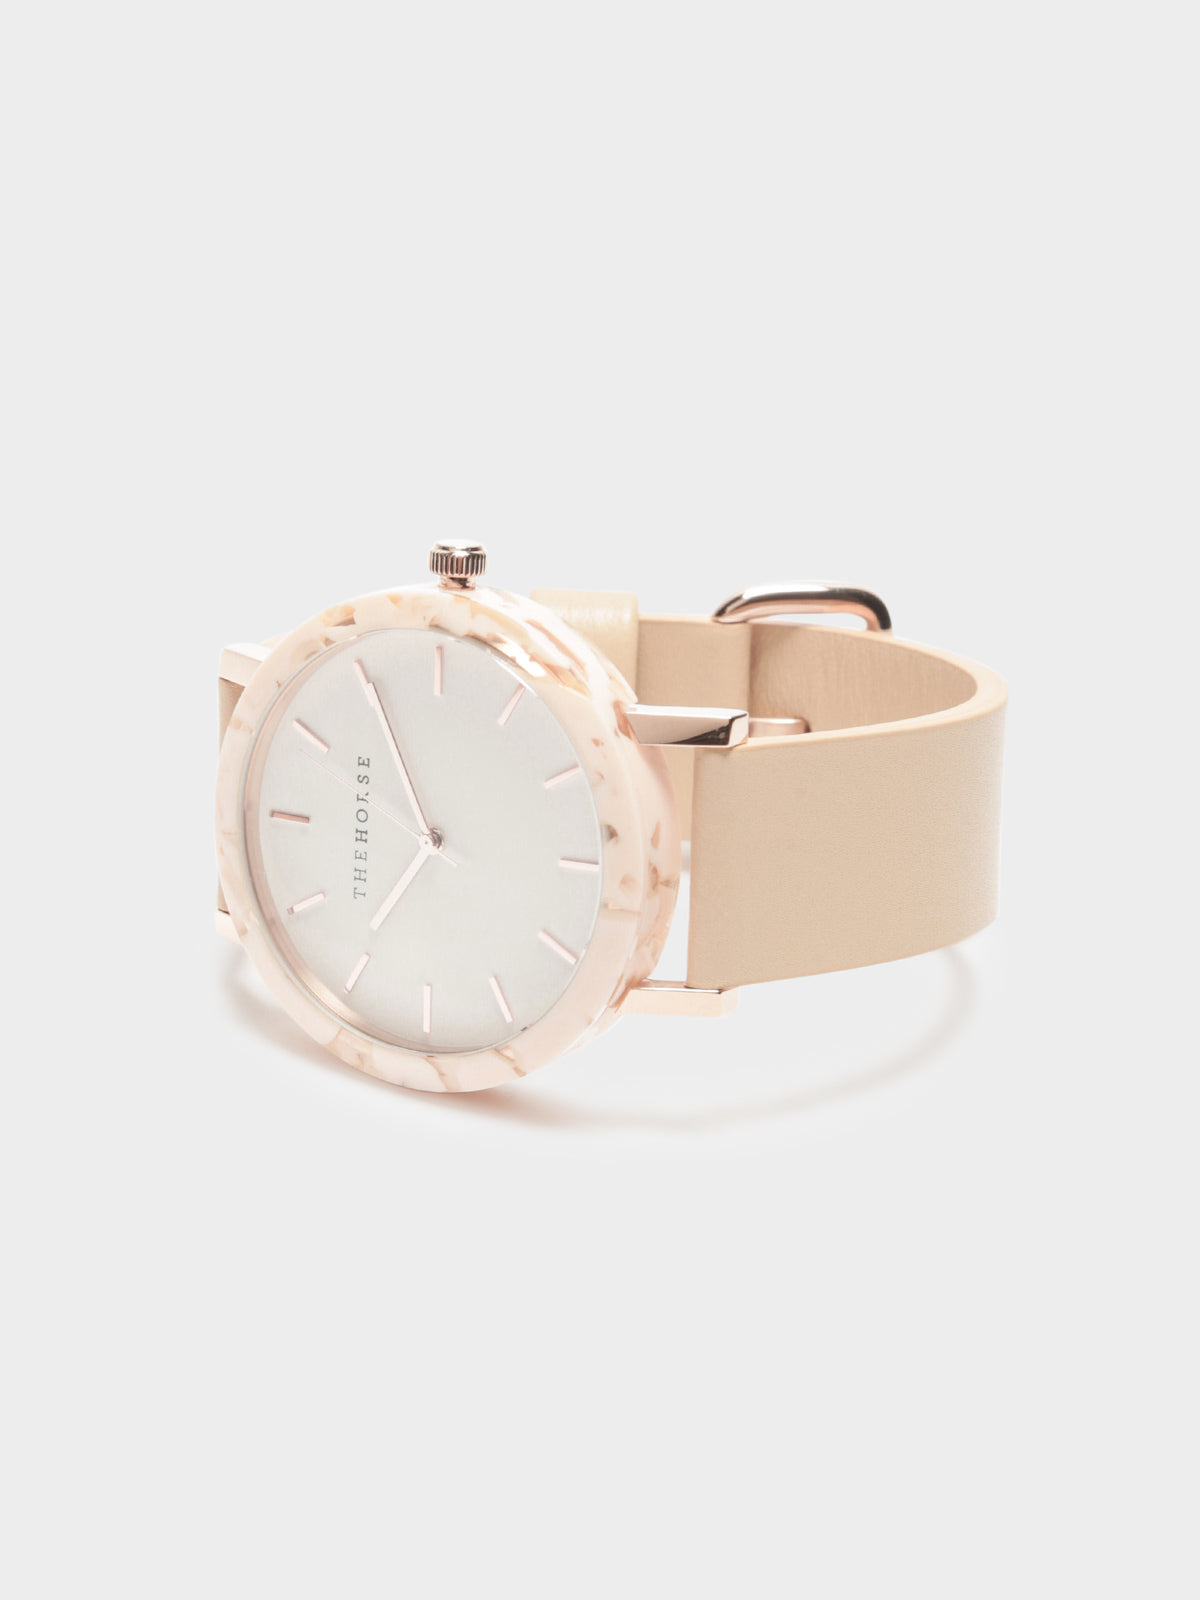 The Resin Watch in Peach Speckle Case / Vegetable Tan Leather Strap